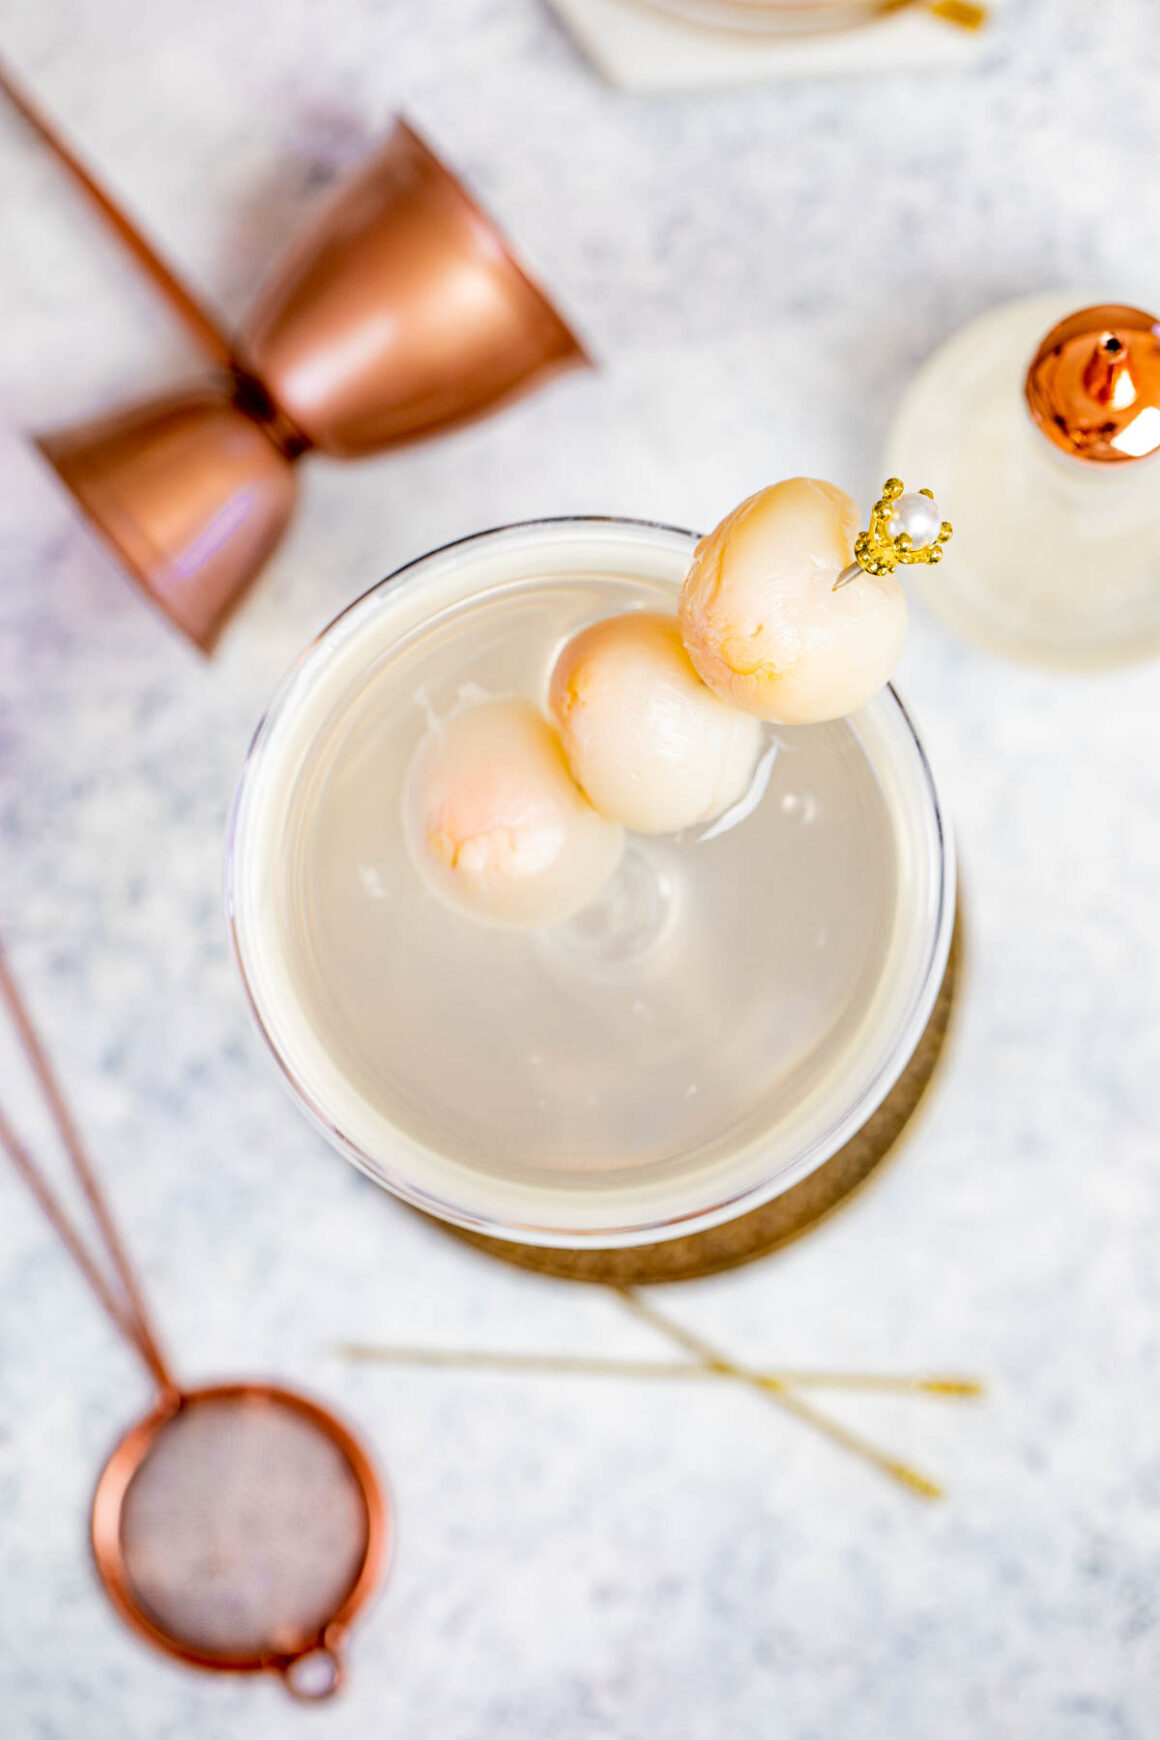 The combination of lychee and martinis gained popularity in the early 20th century, particularly in the United States